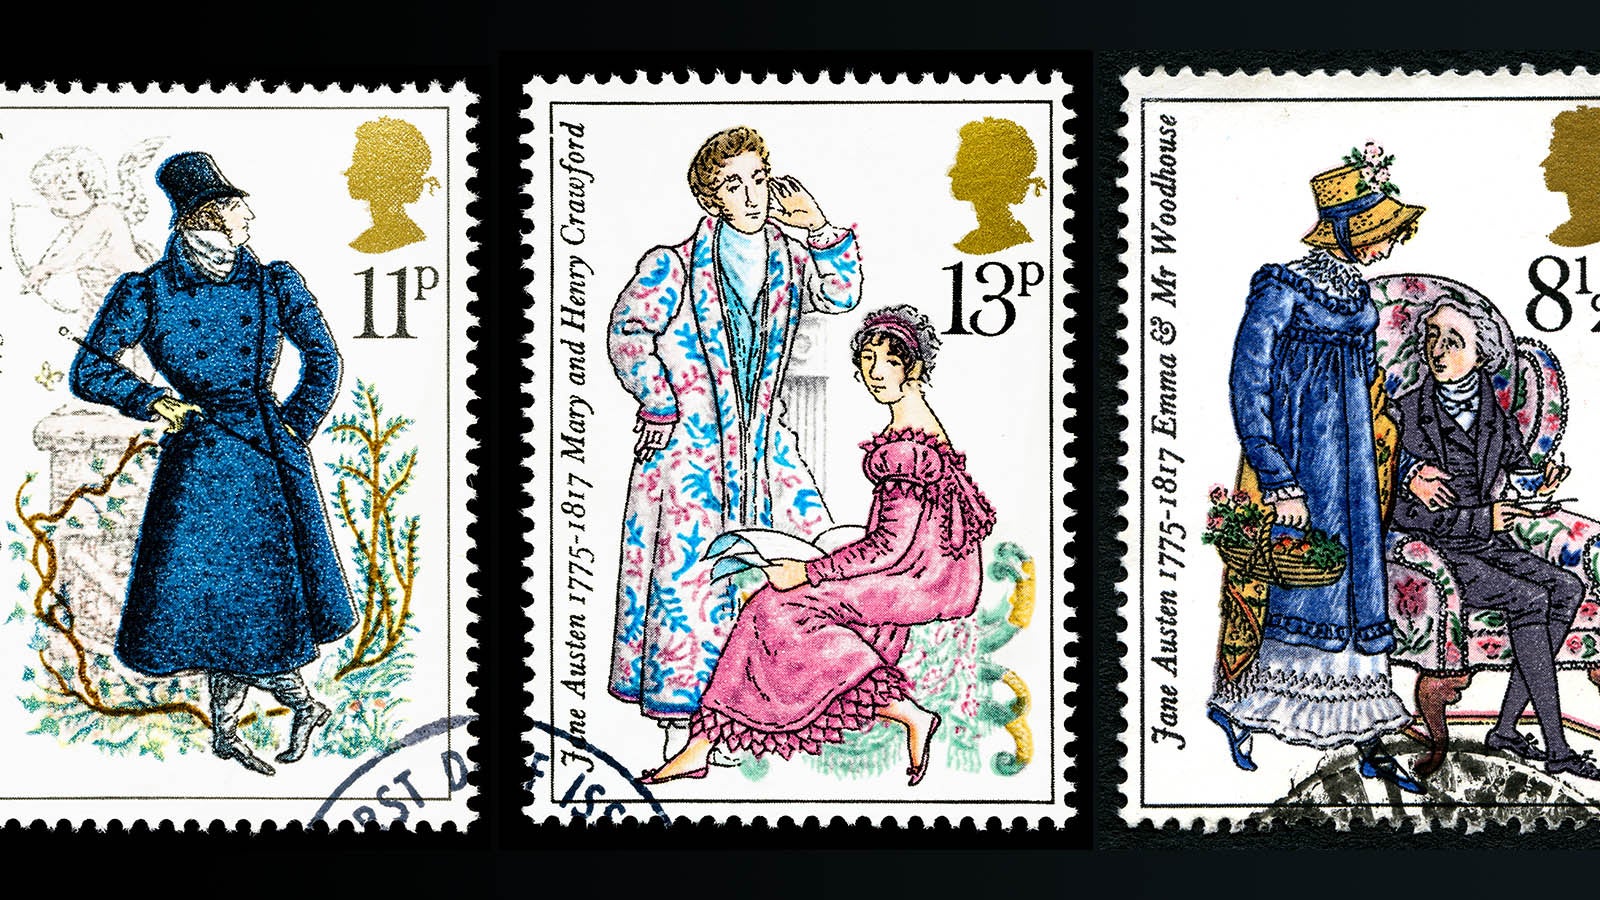 Regency stamps showing couples